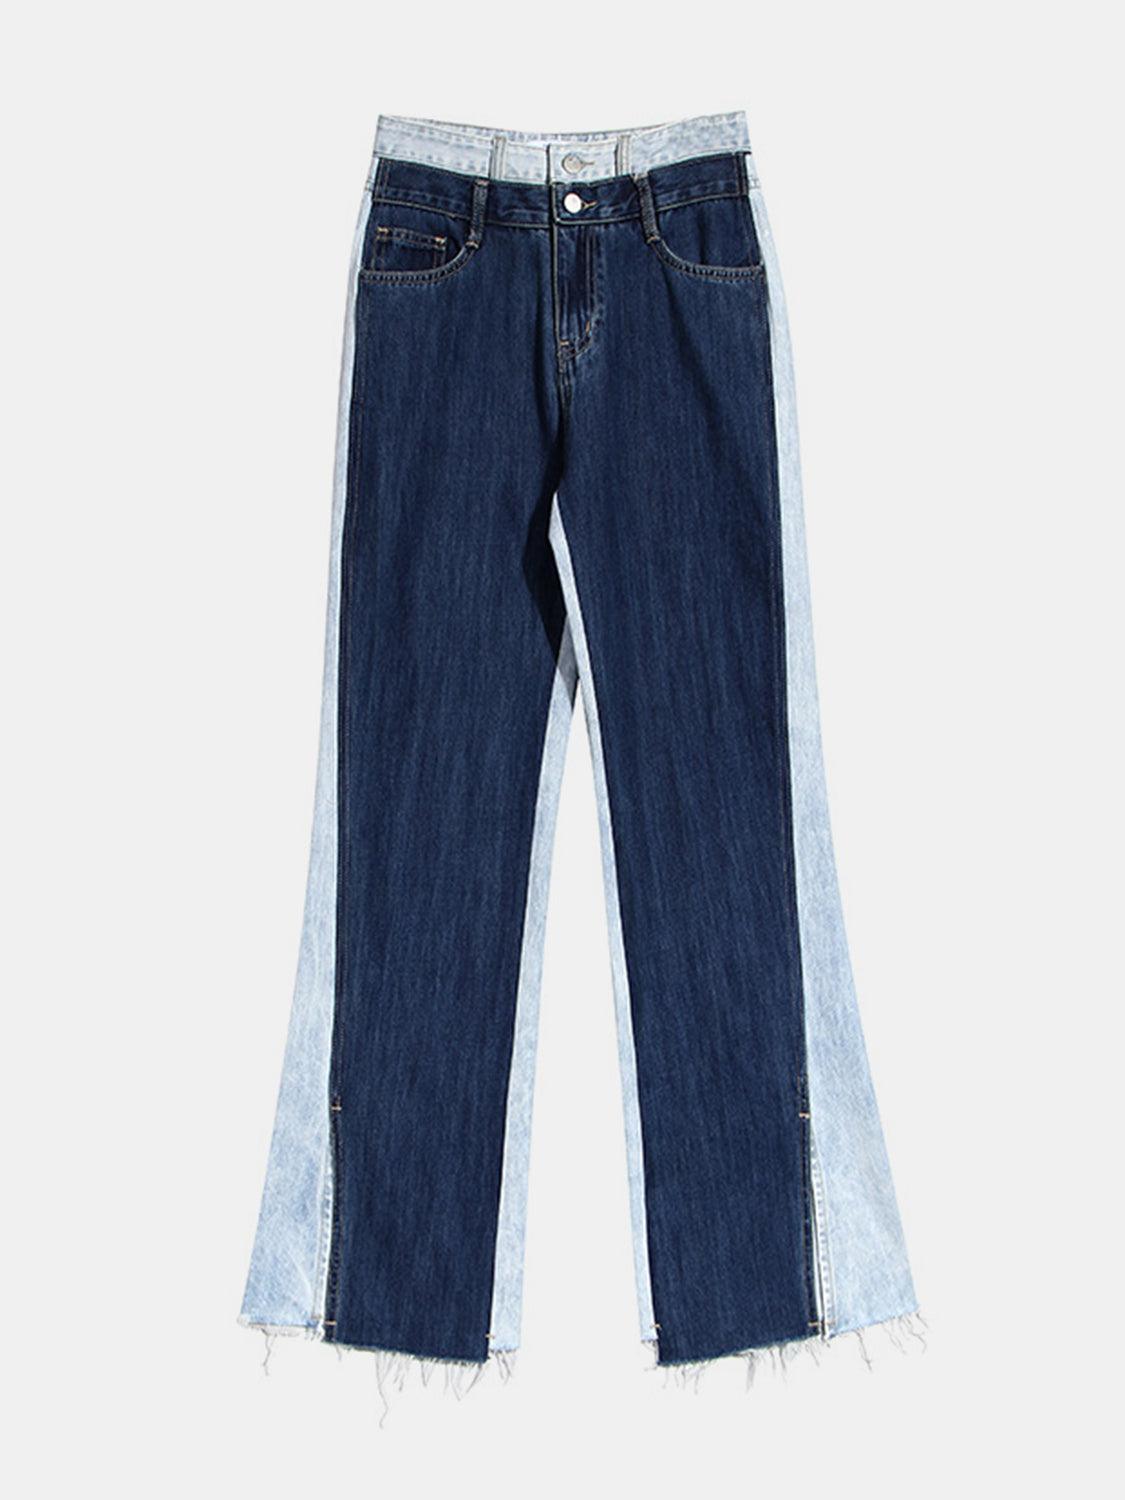 a pair of jeans with fraying on the side